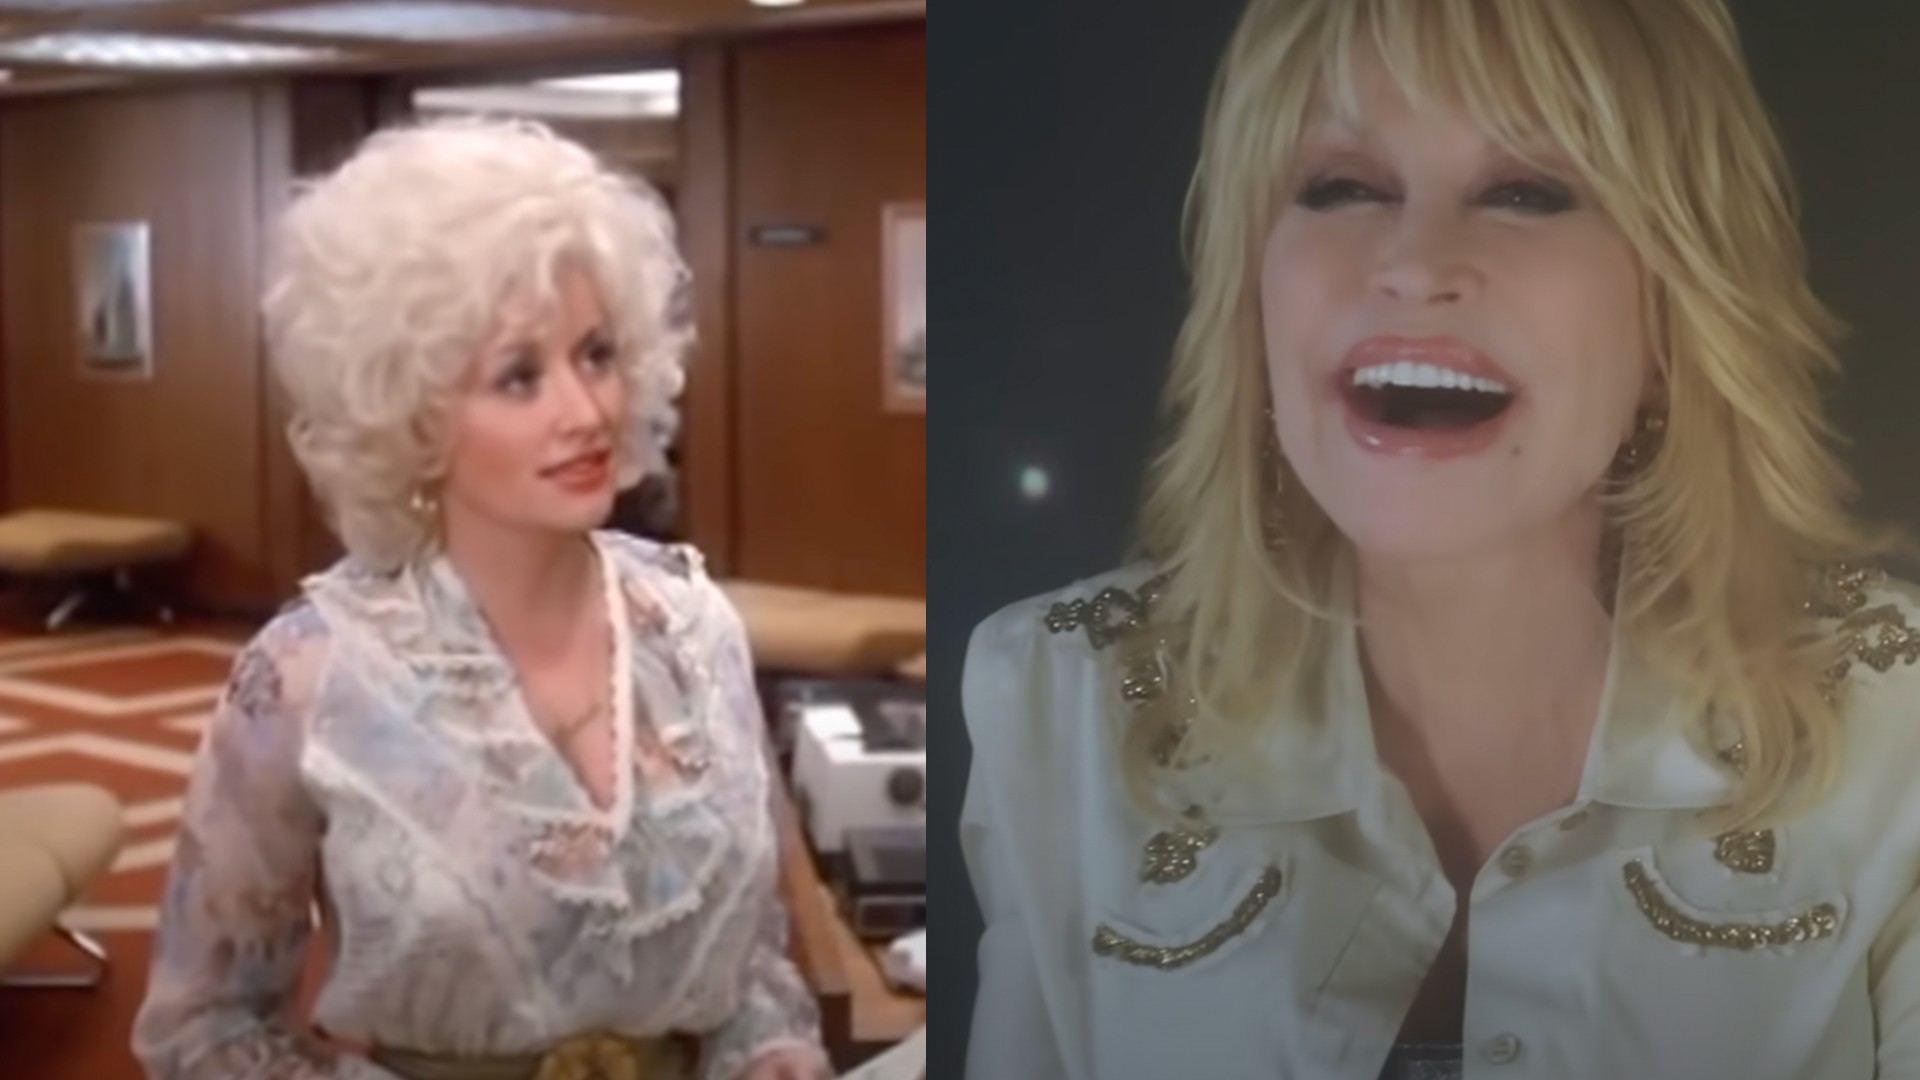 A young Dolly Parton next to an image of Dolly Parton singing.